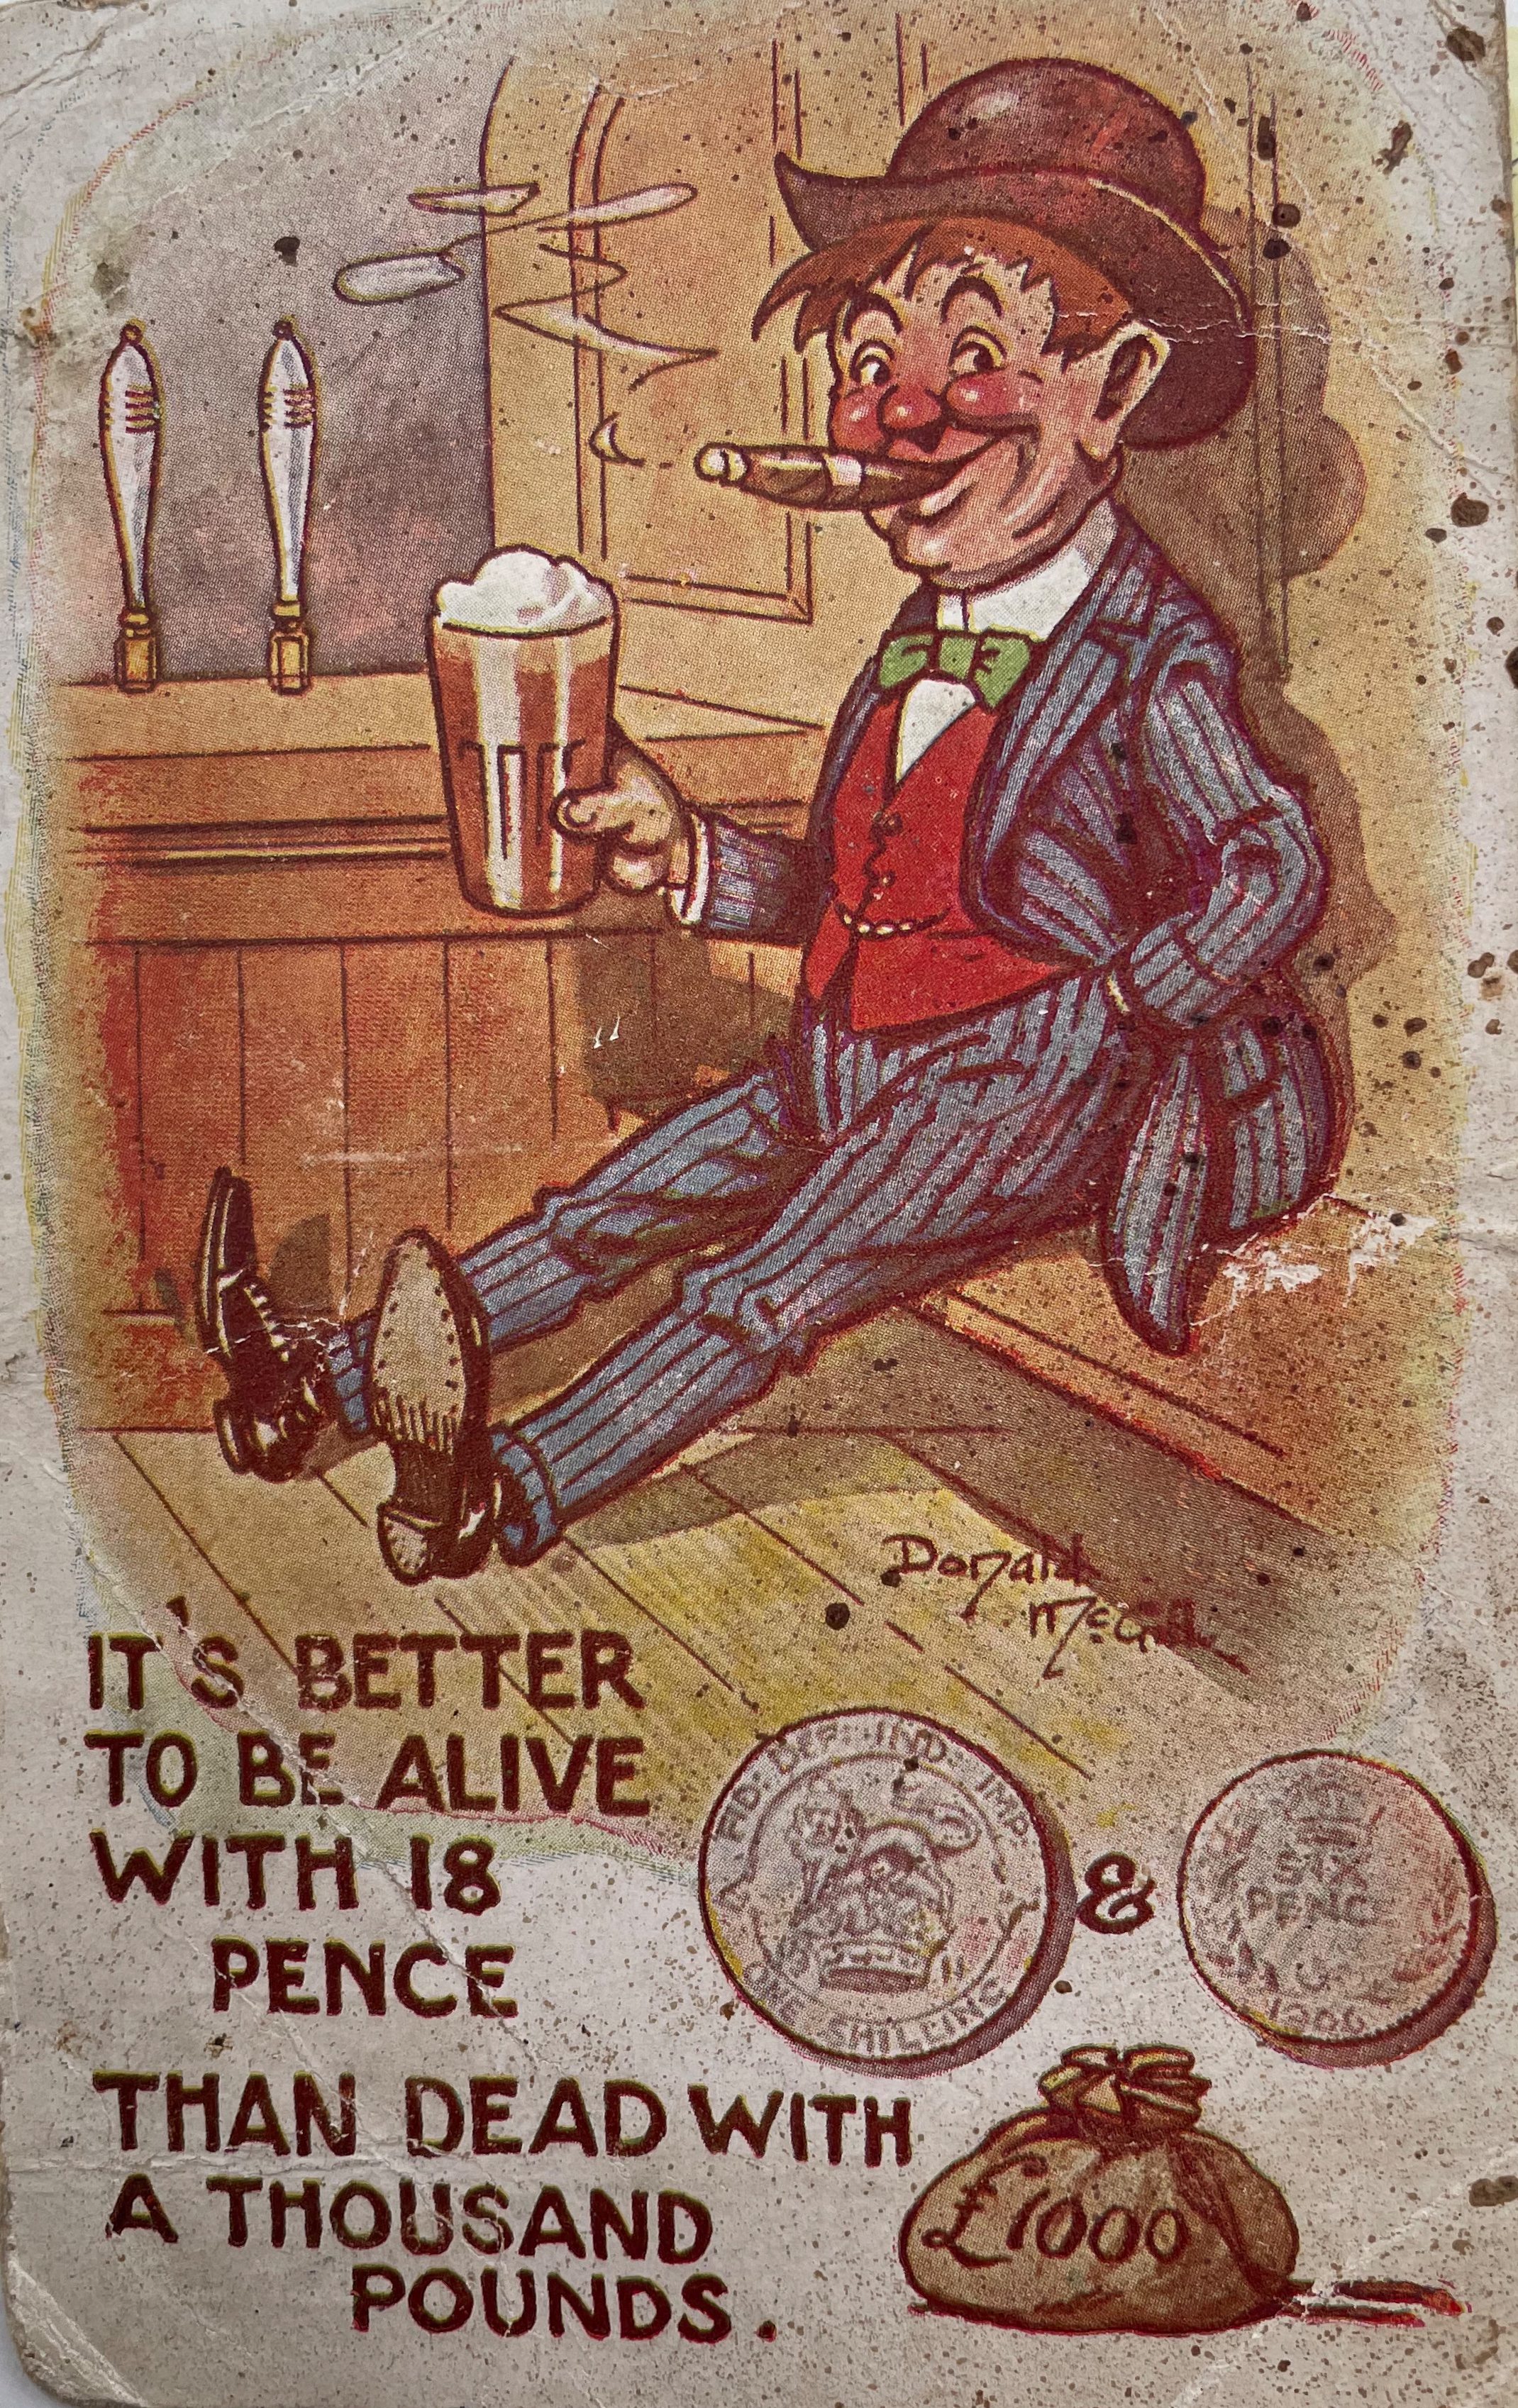 colour postcard with a drawing of a male figure dressed in a blue pinstriped suit with red waistcoat and brown at the bar holding a pint of beer with a cigar in his mouth. The caption reads 'It's better to be alive with 18 pence, than dead with a thousand points. The coins and a bag of money are shown next to the caption